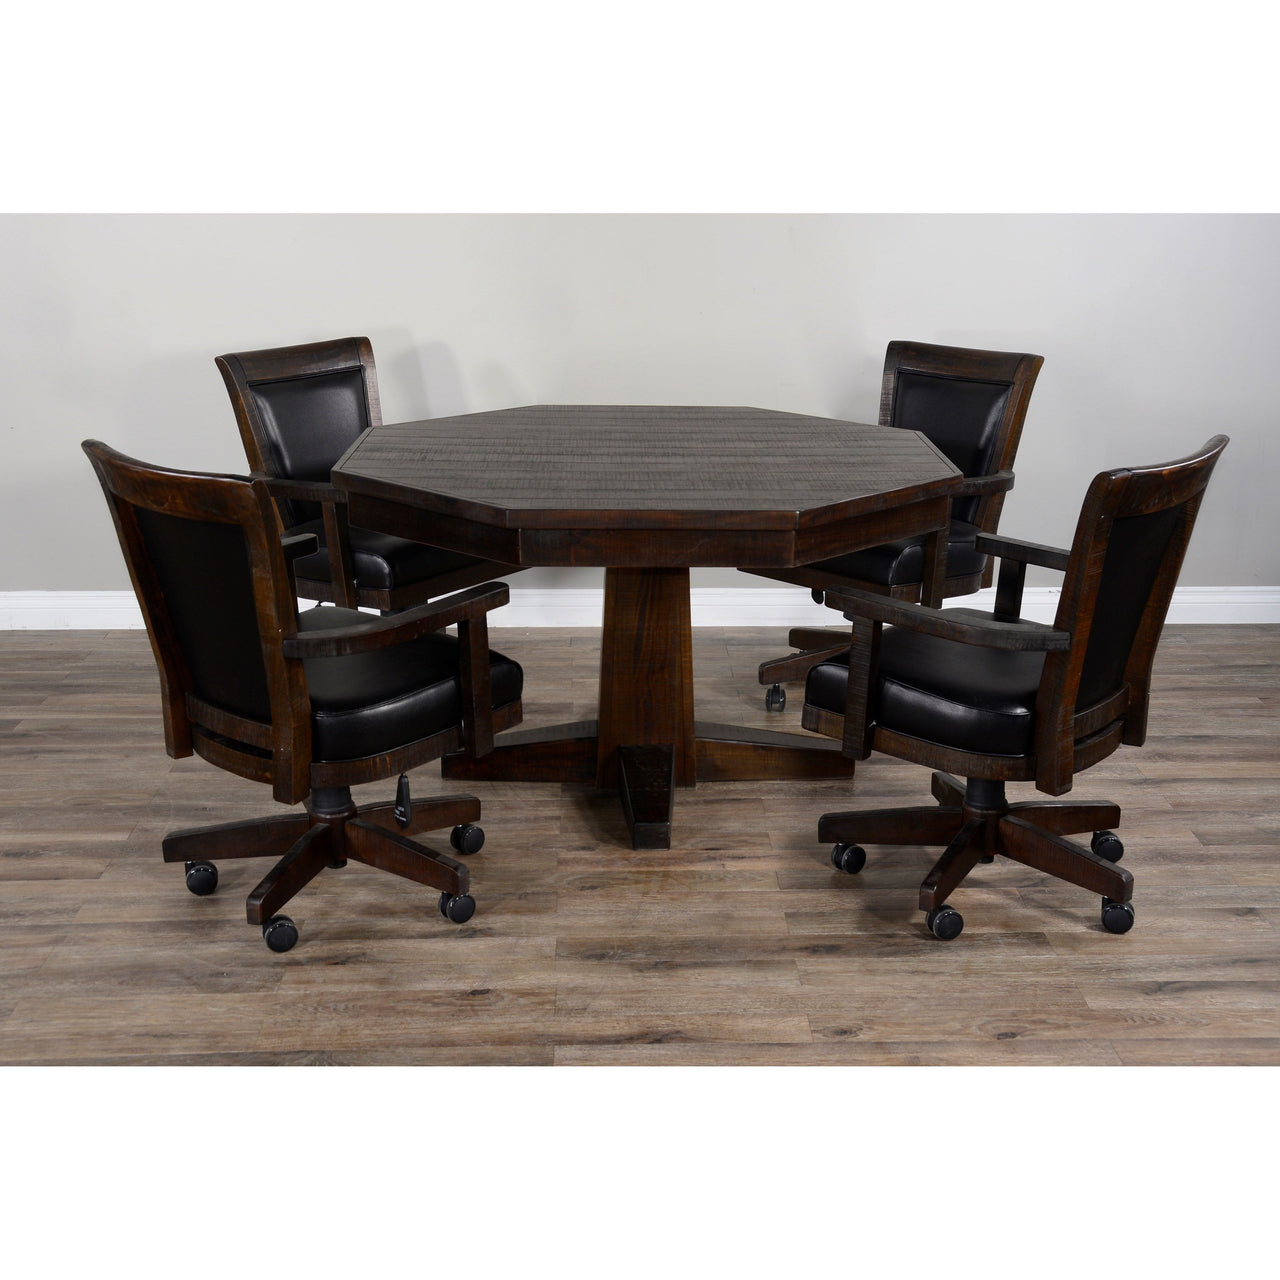 Sunny Designs Poker & Dining Table Set Tobacco Leaf (Brown Finish) Poker with Table & Matching Chairs-AMERICANA-POKER-TABLES